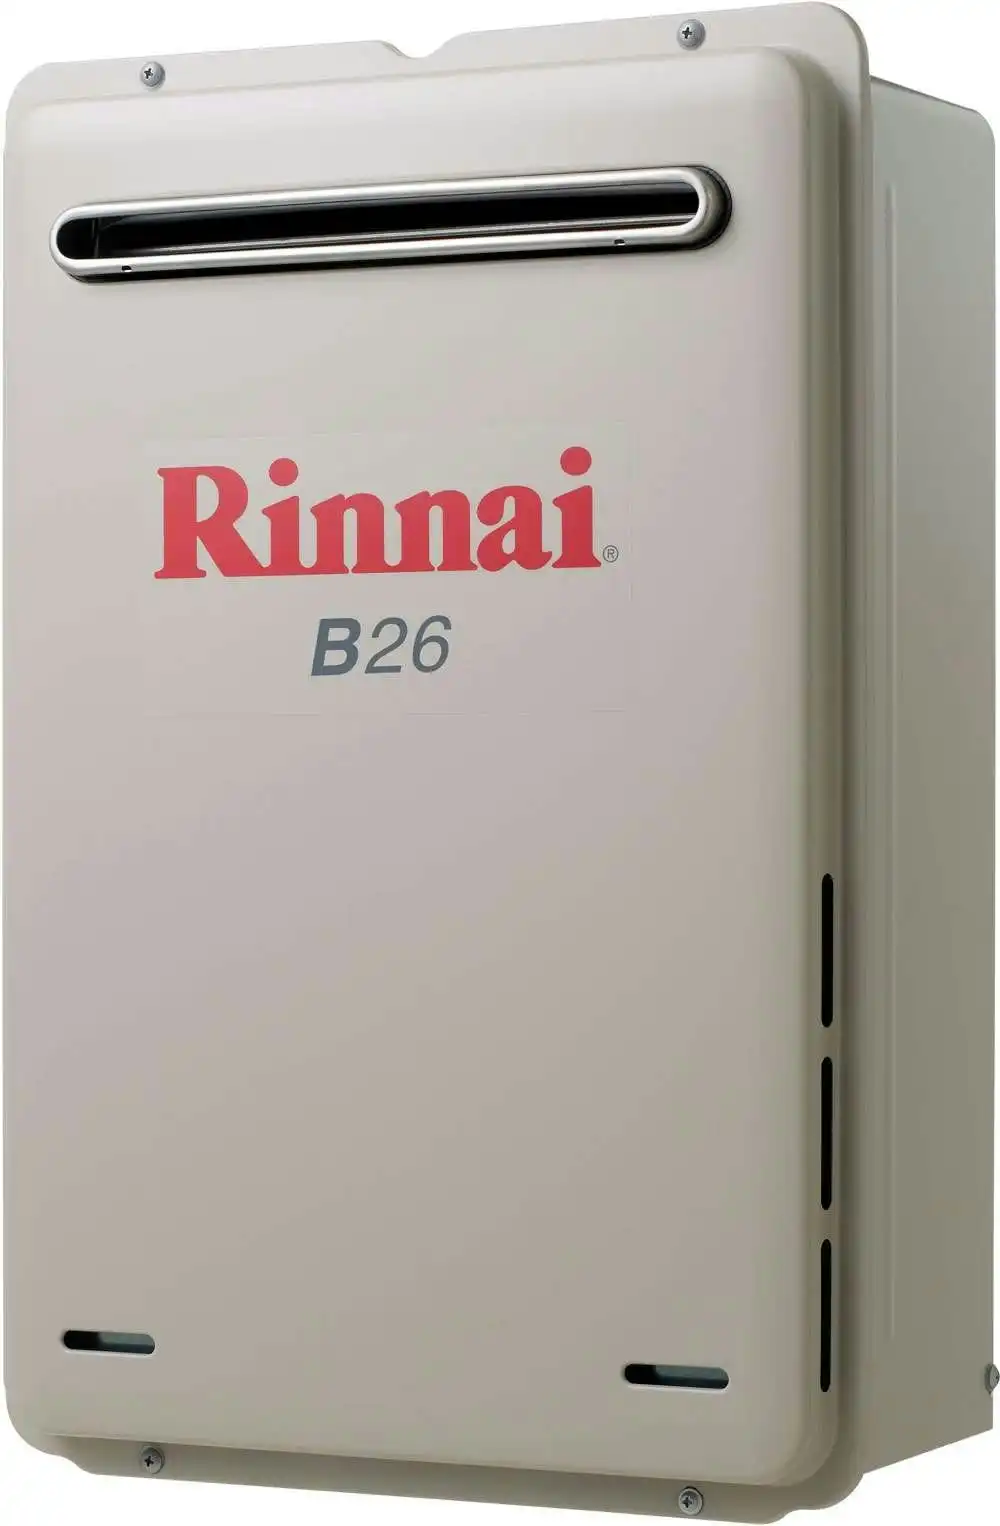 Rinnai Builders 50oC 26L Instant Hot Water System B26N50A B26 *NATURAL GAS*